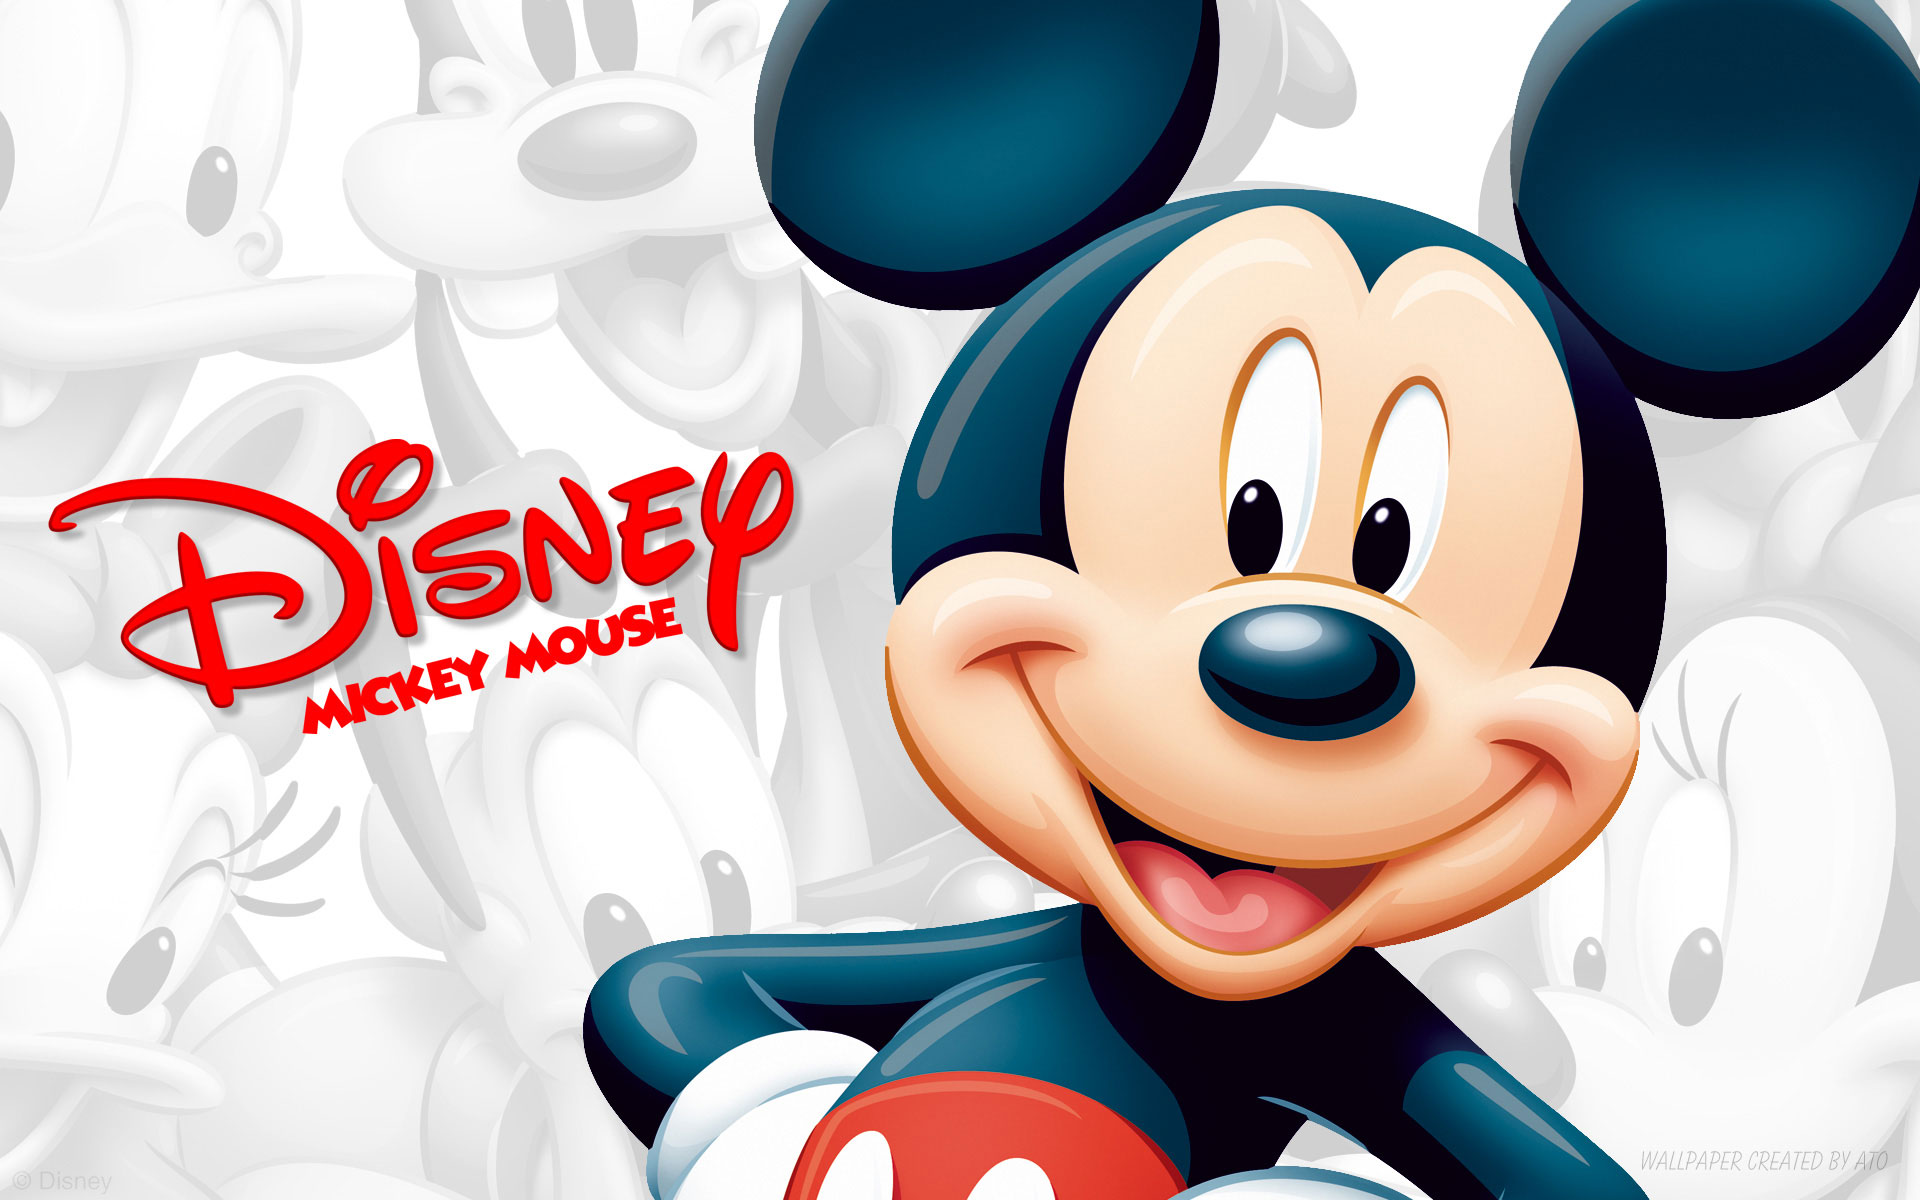 Disney 4K wallpaper for your desktop or mobile screen free and easy to download